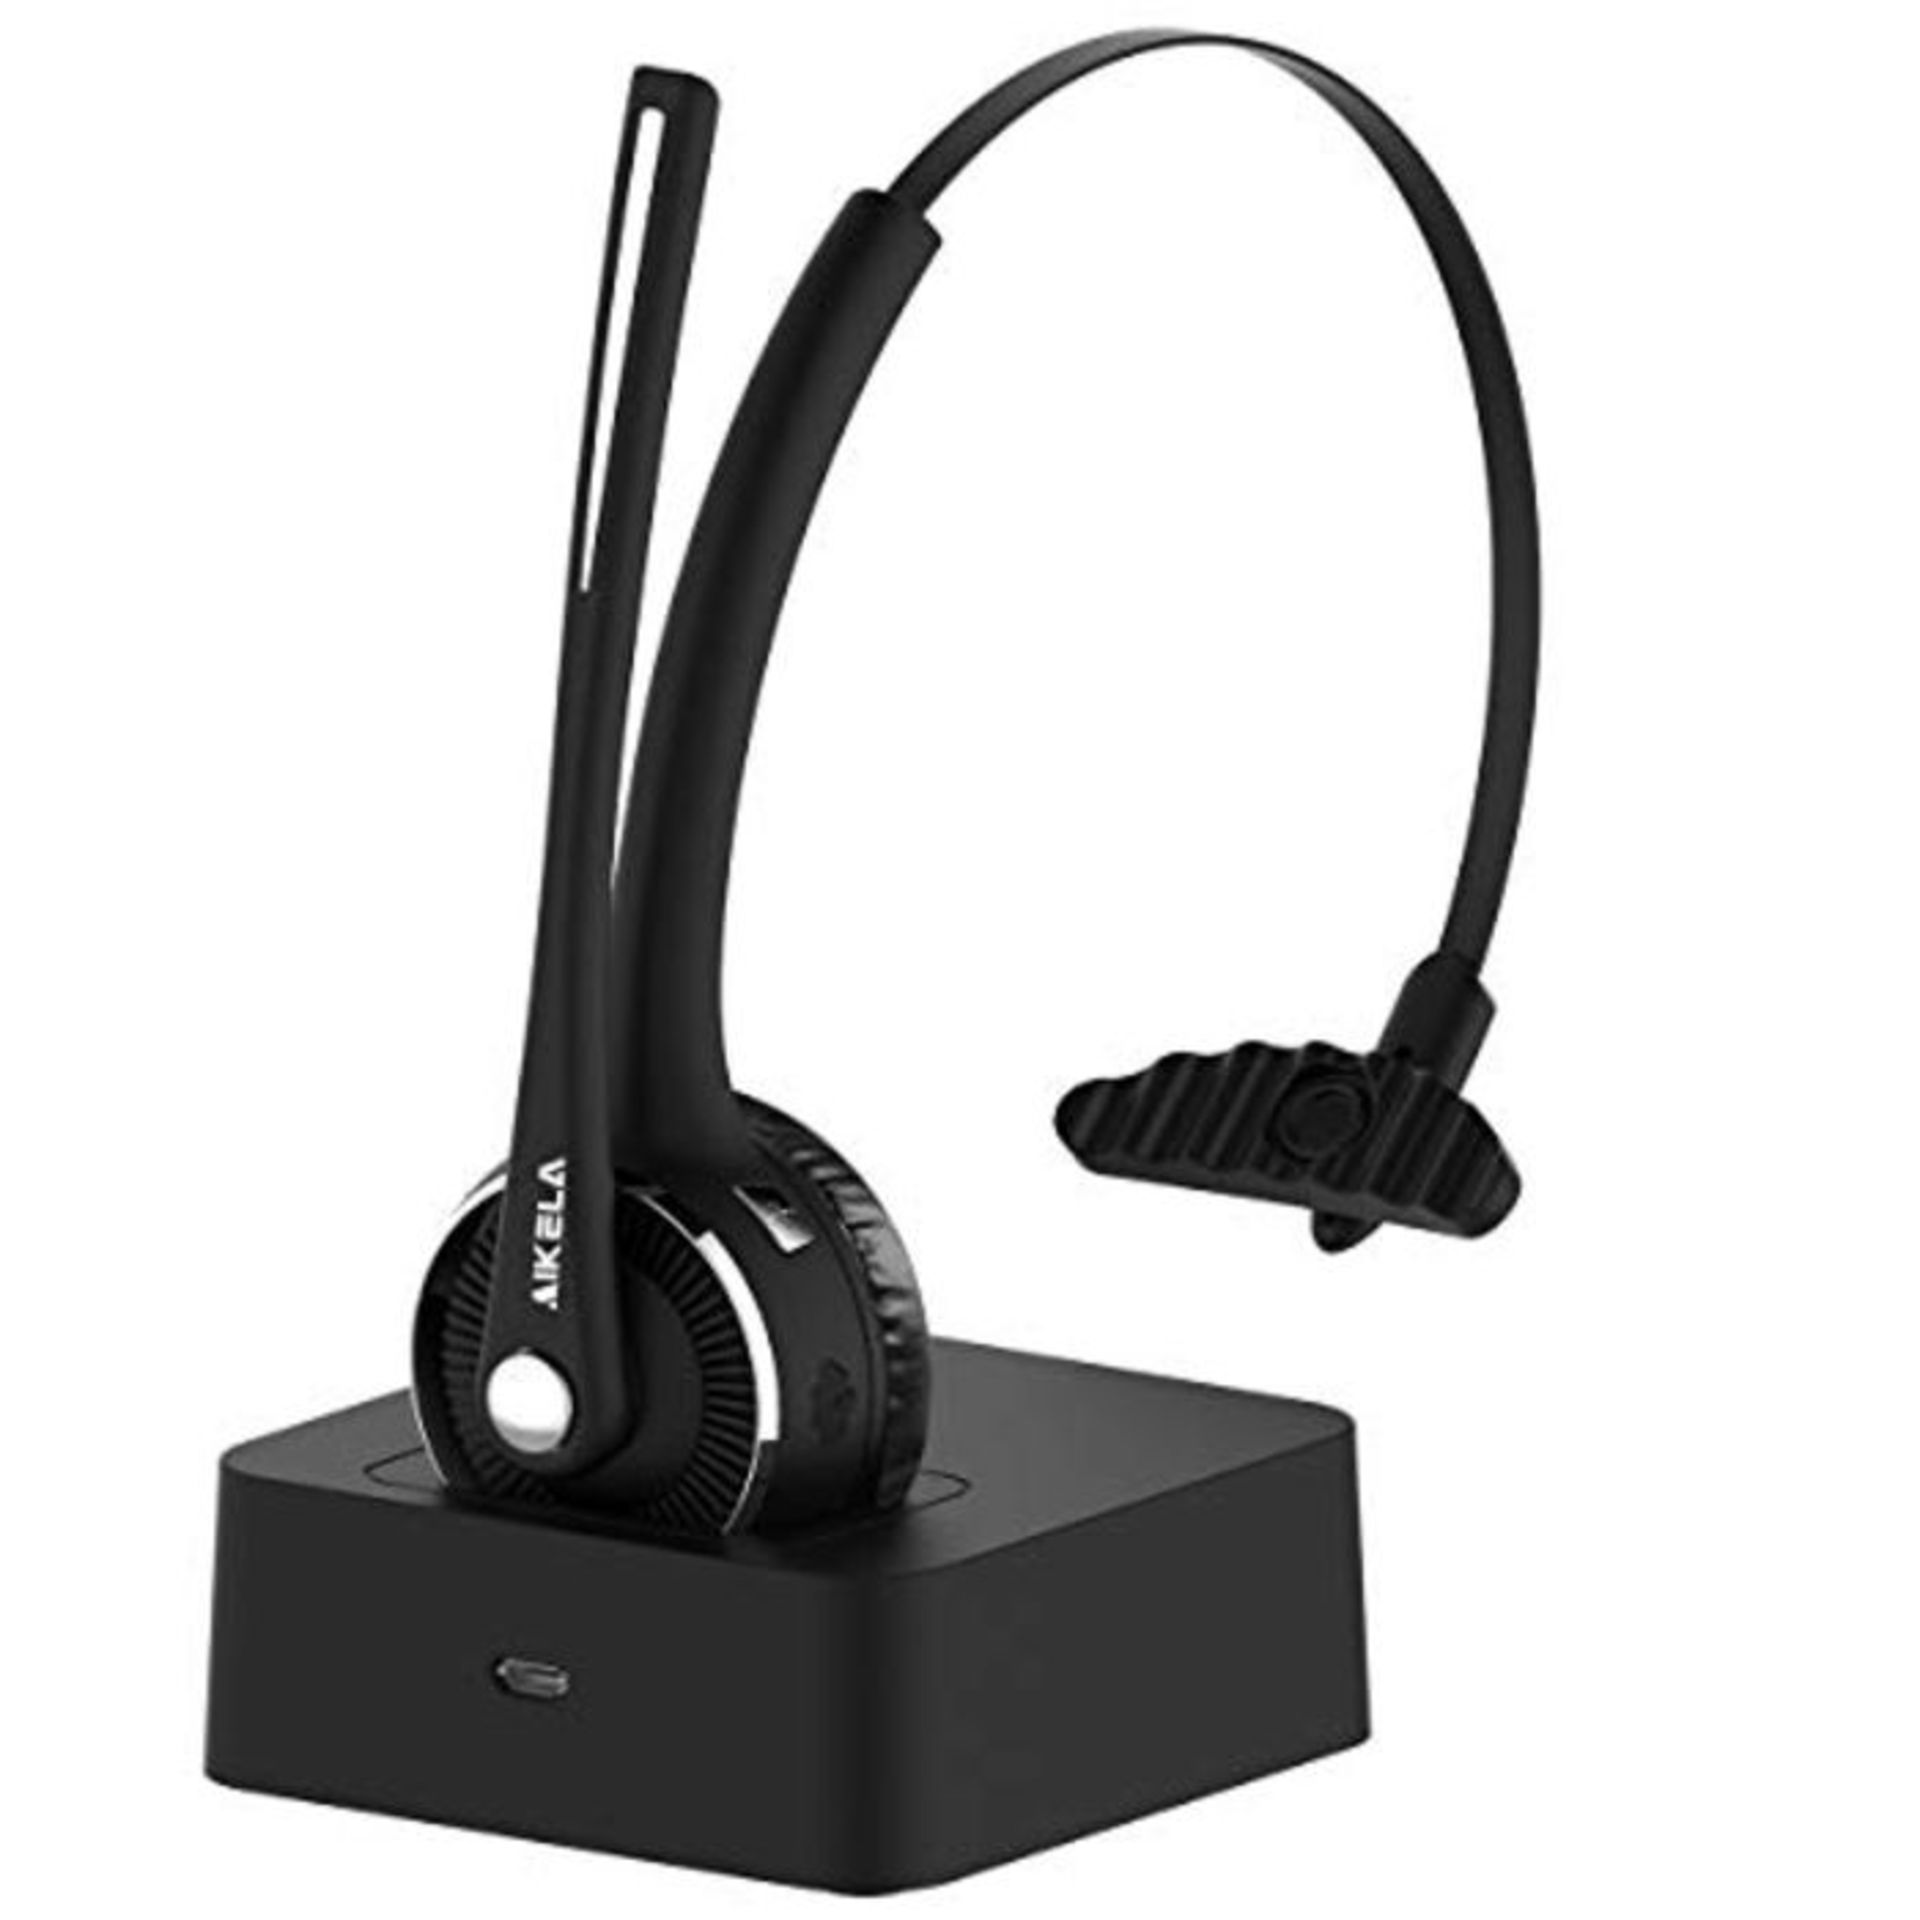 AIKELA V5.0 Bluetooth Headset with Noise Cancelling Microphone, Wireless Headset with